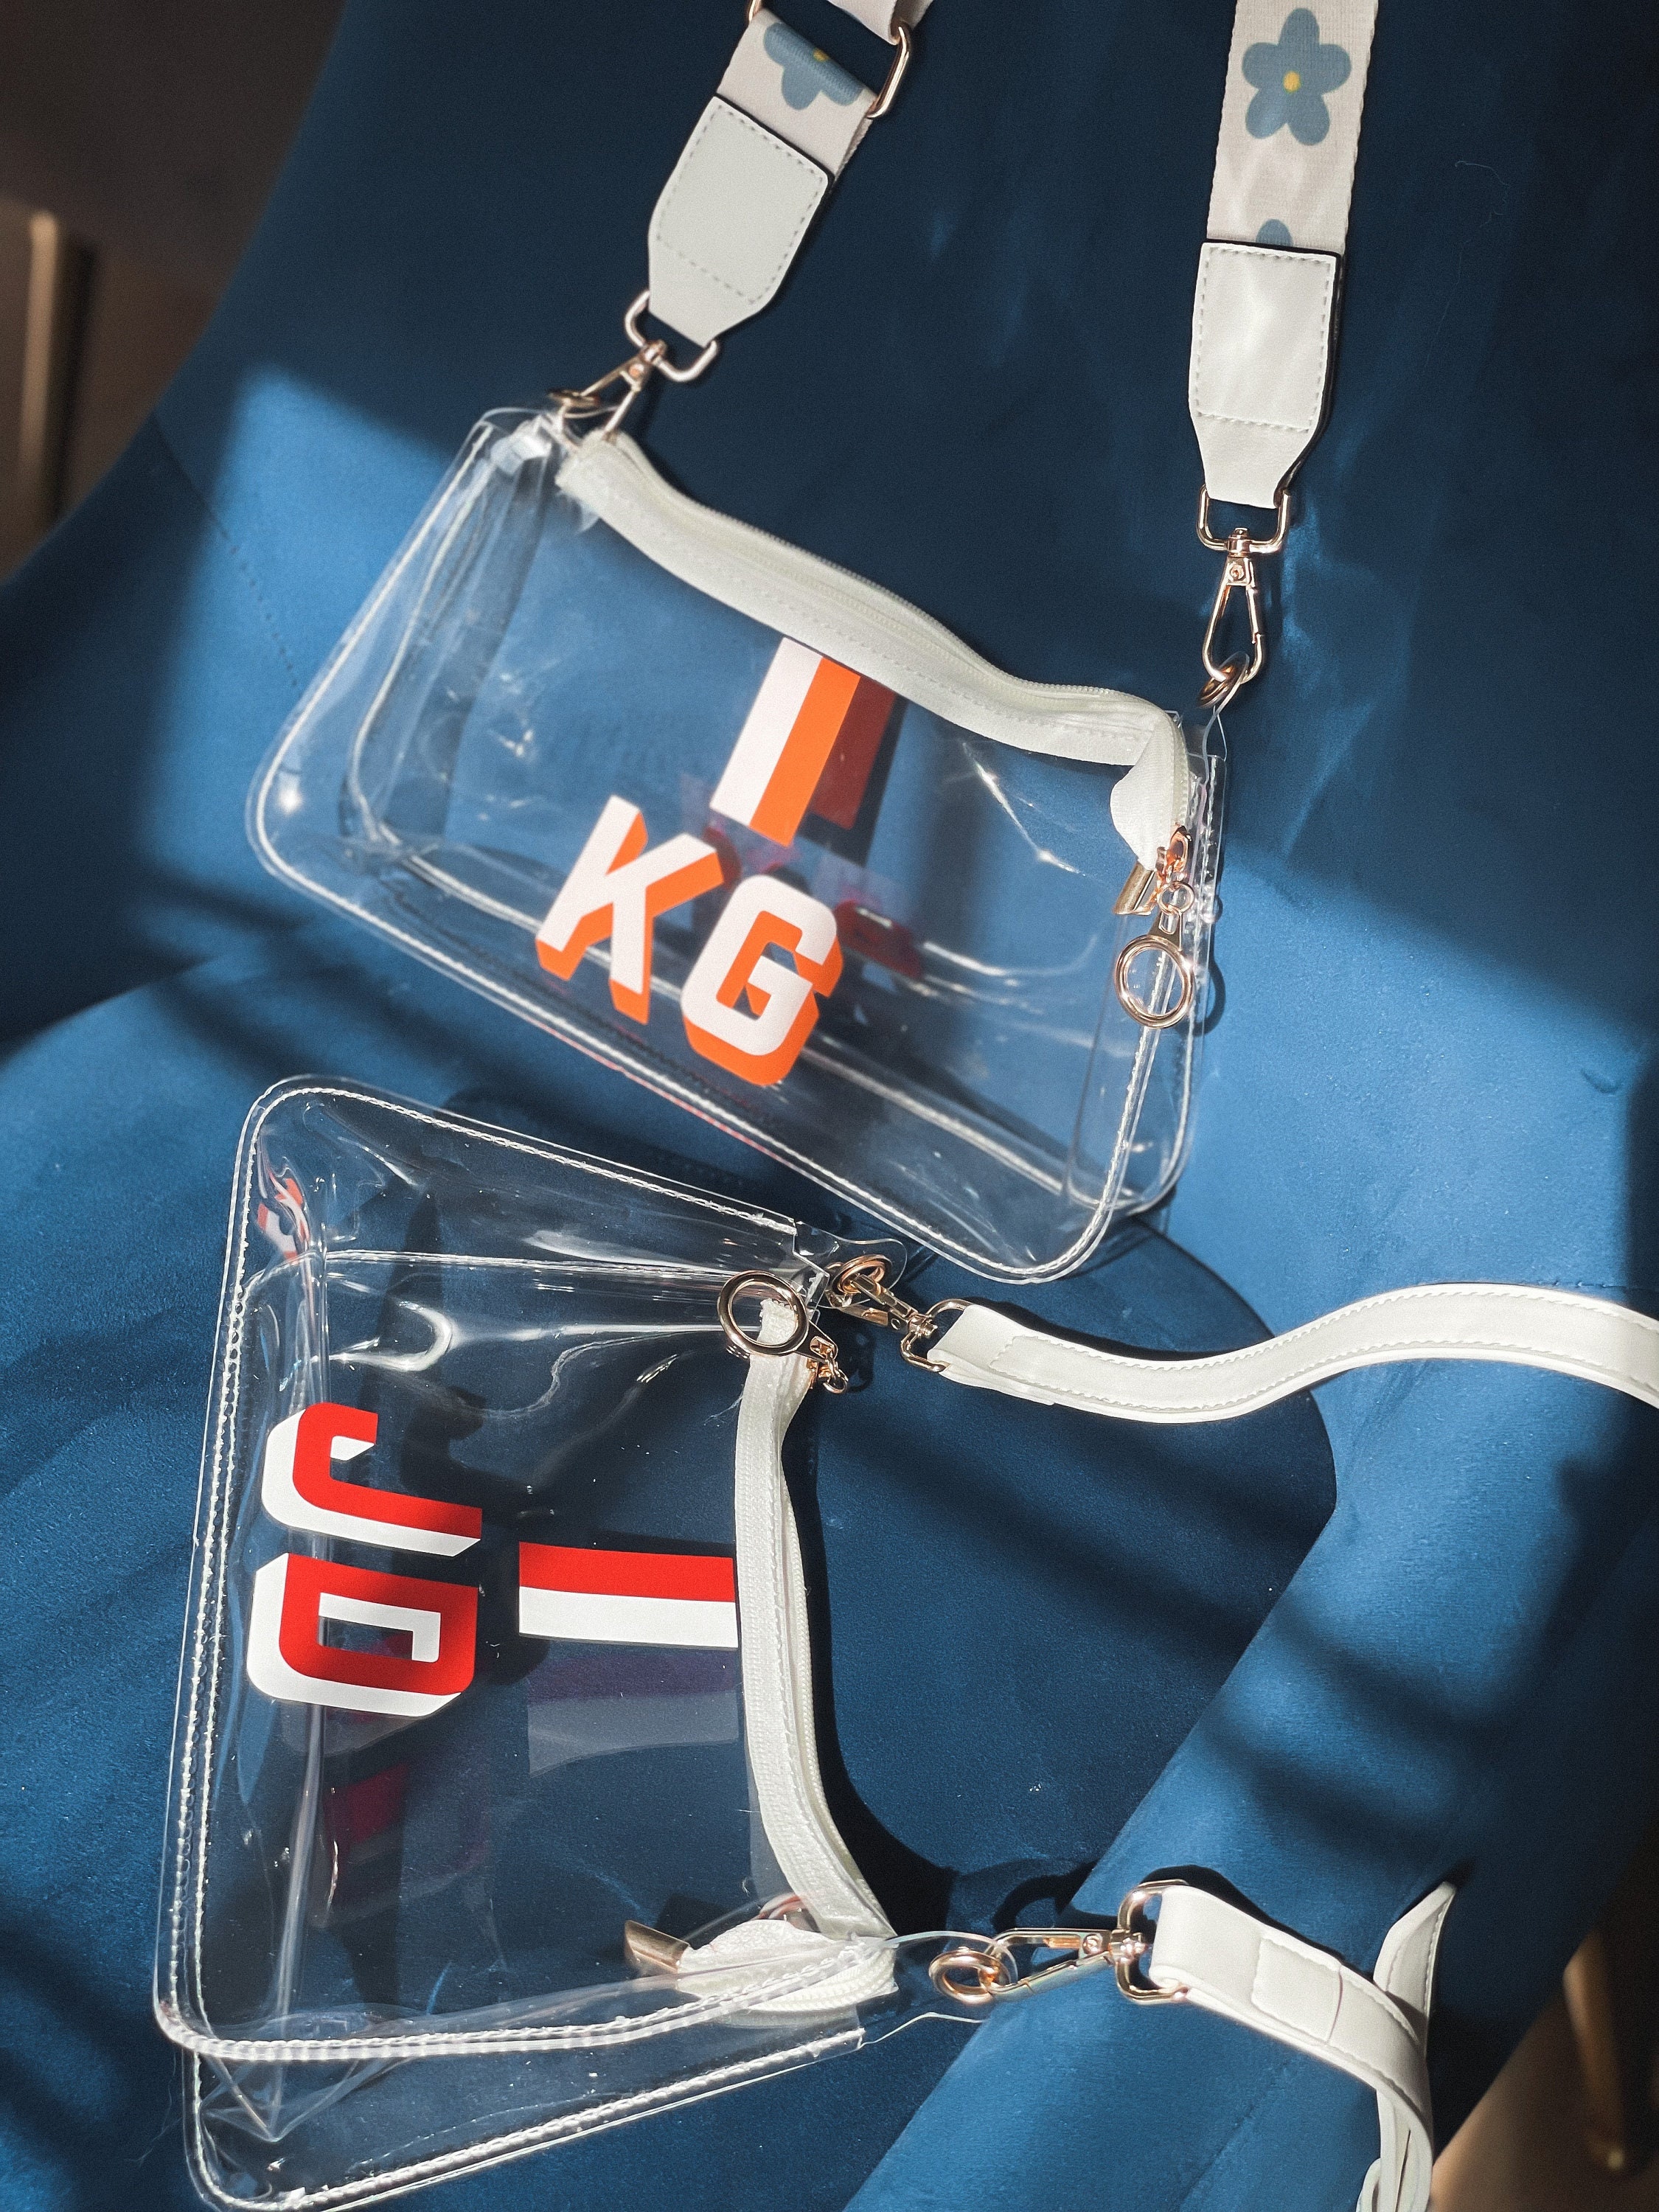 Clear Crossbody Bag With Coin Purse, Trendy Pvc Square Bag